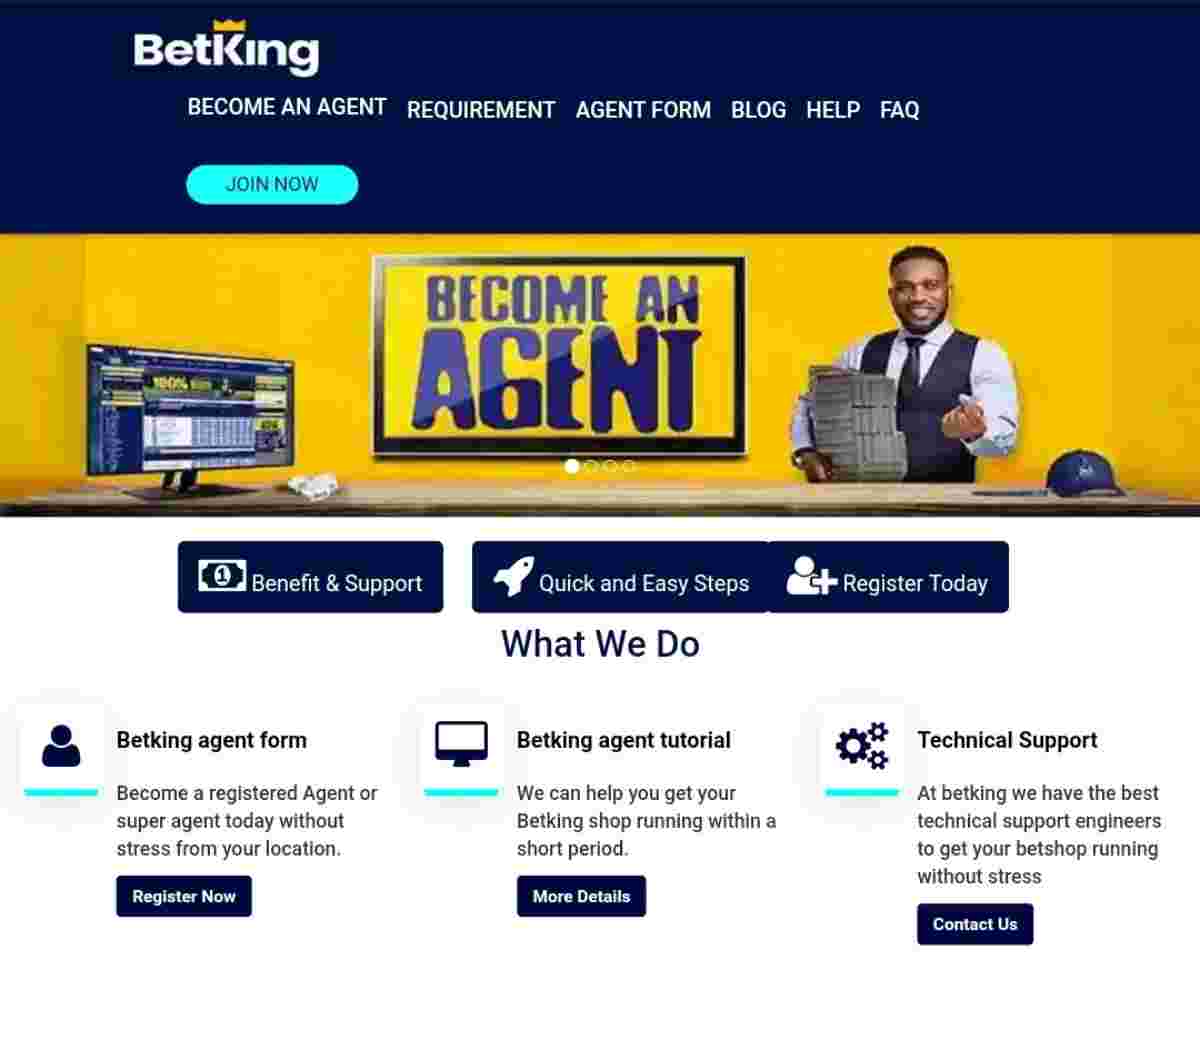 How to Become a Betking Agent (Own a Betking Shop)